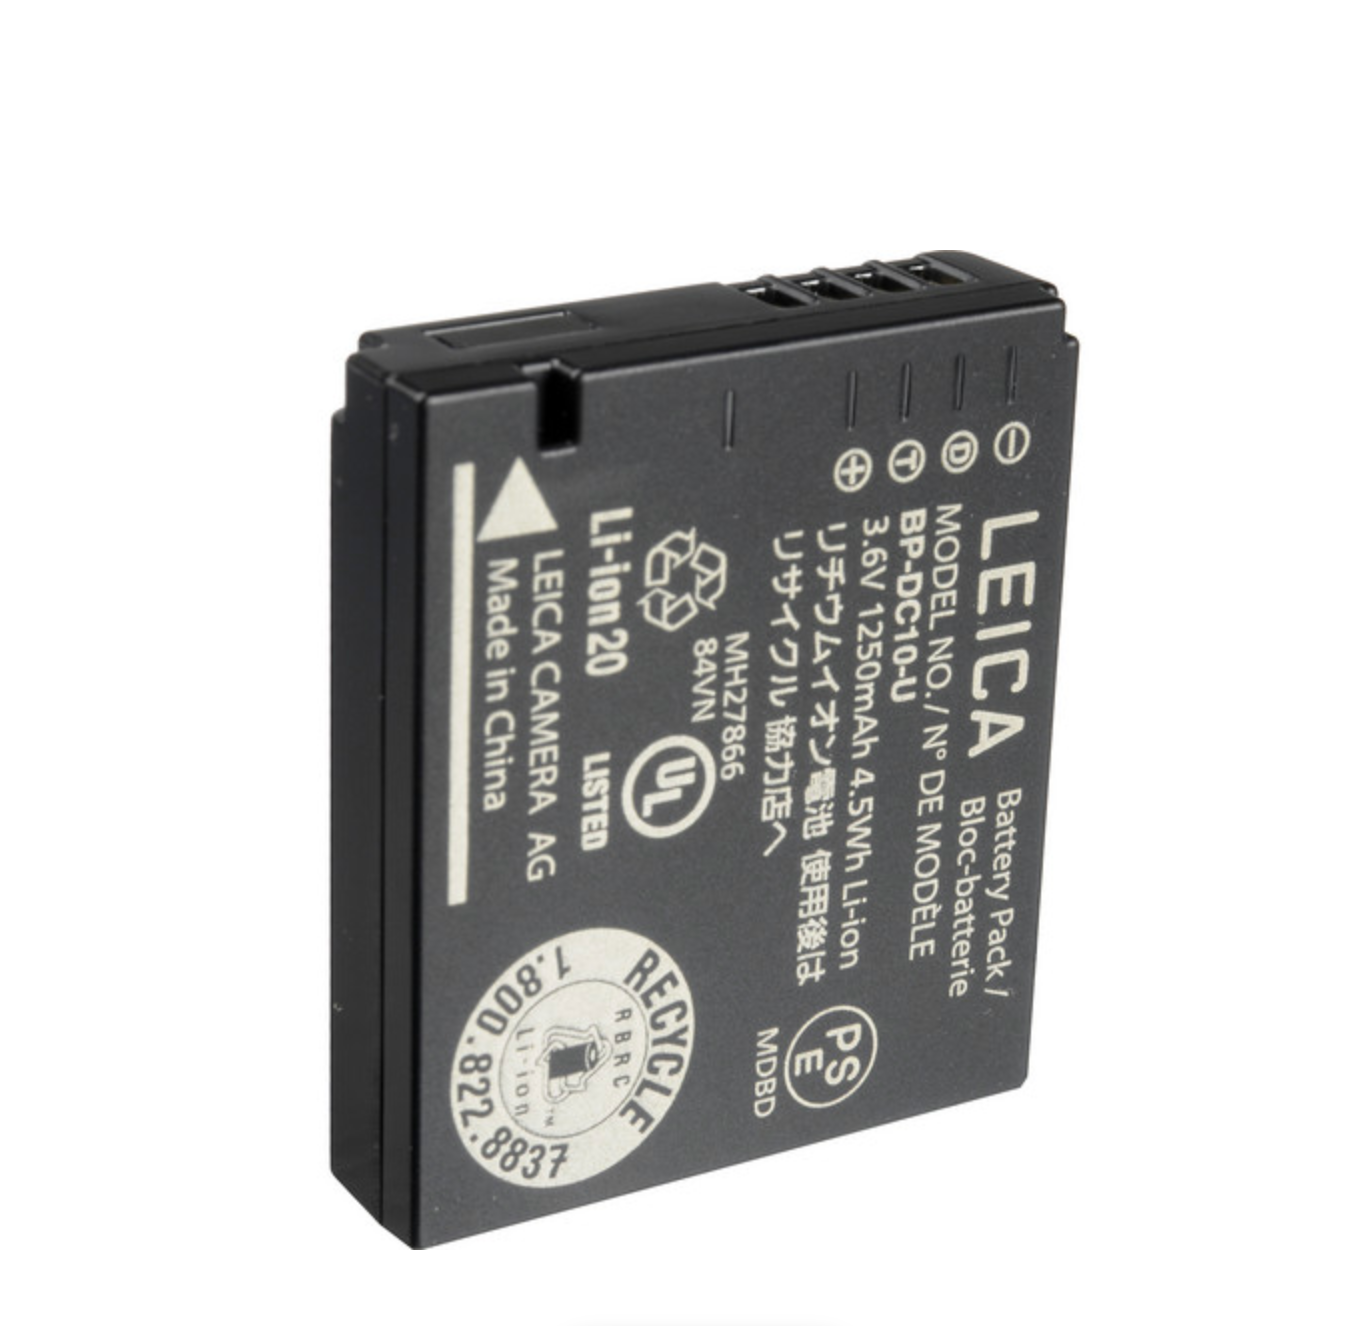 Leica BP-DC 10 Li-Ion Battery for the Leica D-Lux 5, D-Lux 6